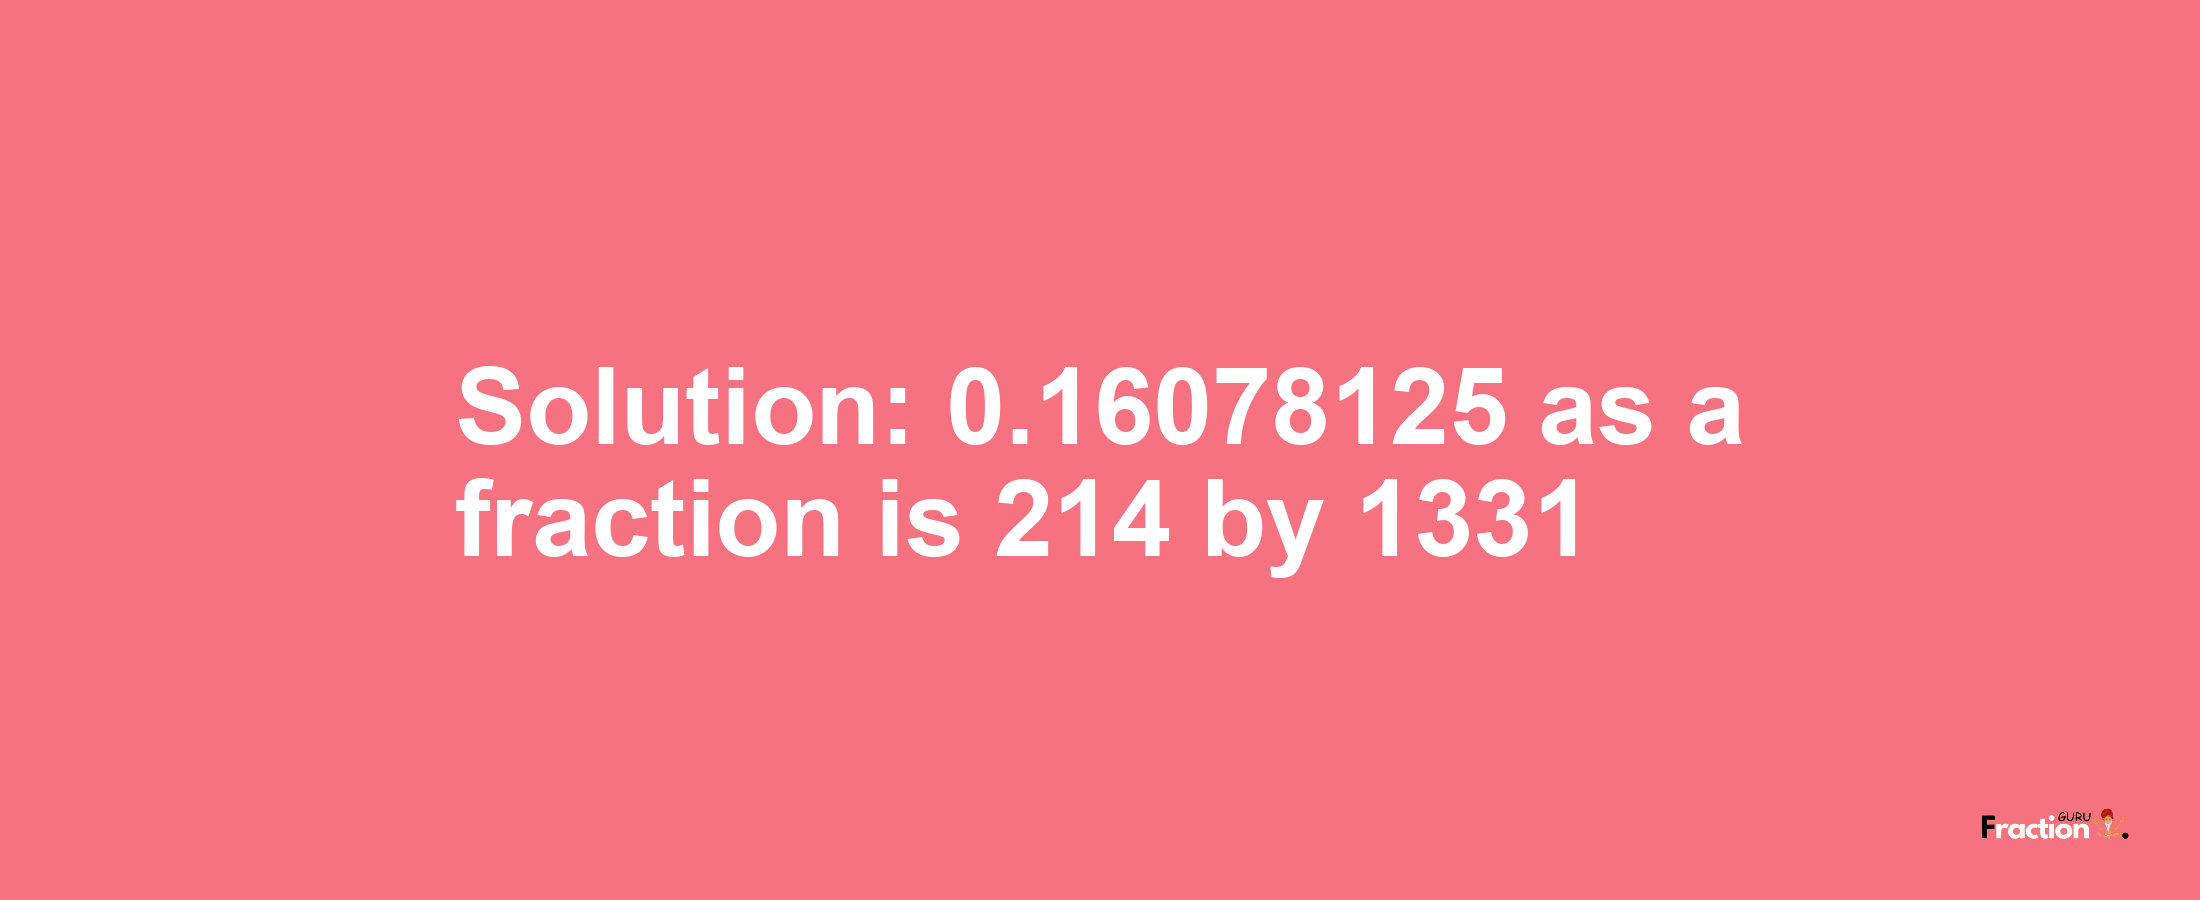 Solution:0.16078125 as a fraction is 214/1331